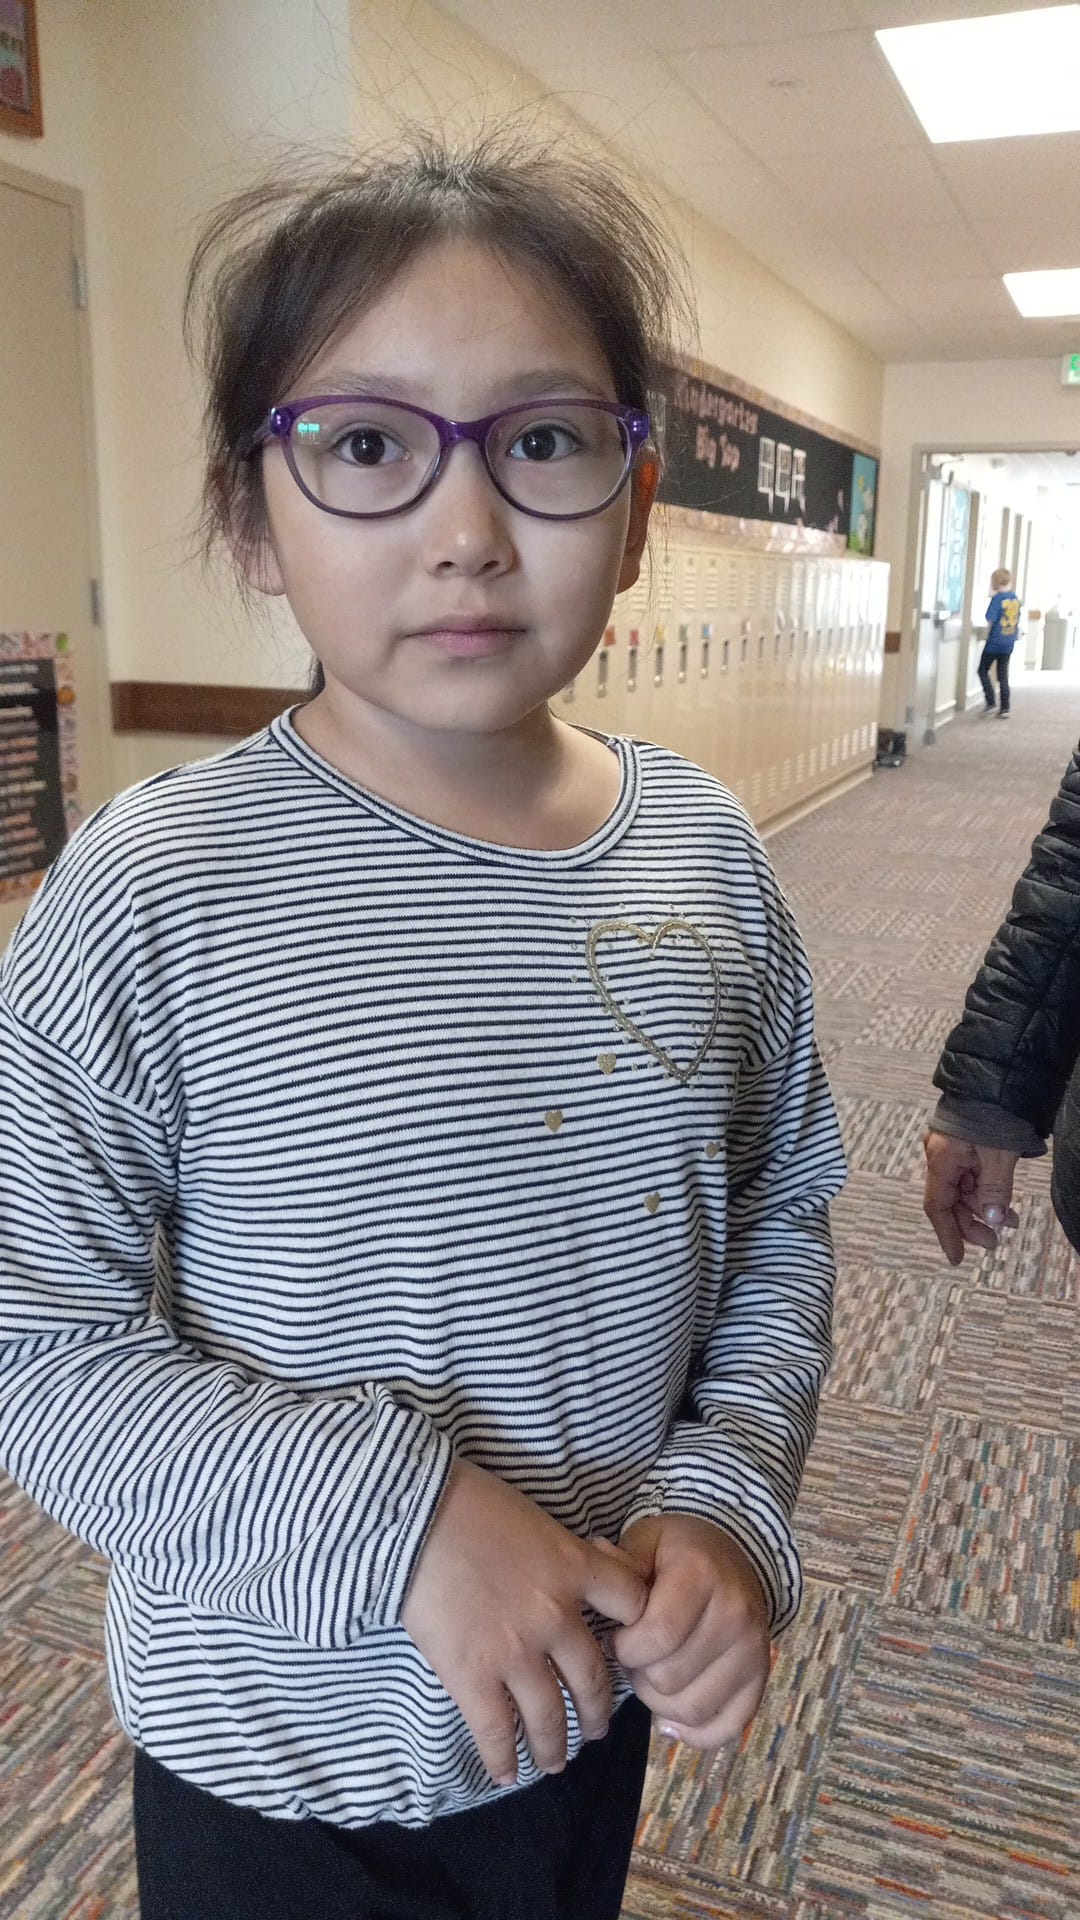 MEP Student Wearing her new glasses, purchased by CRSD MEP.